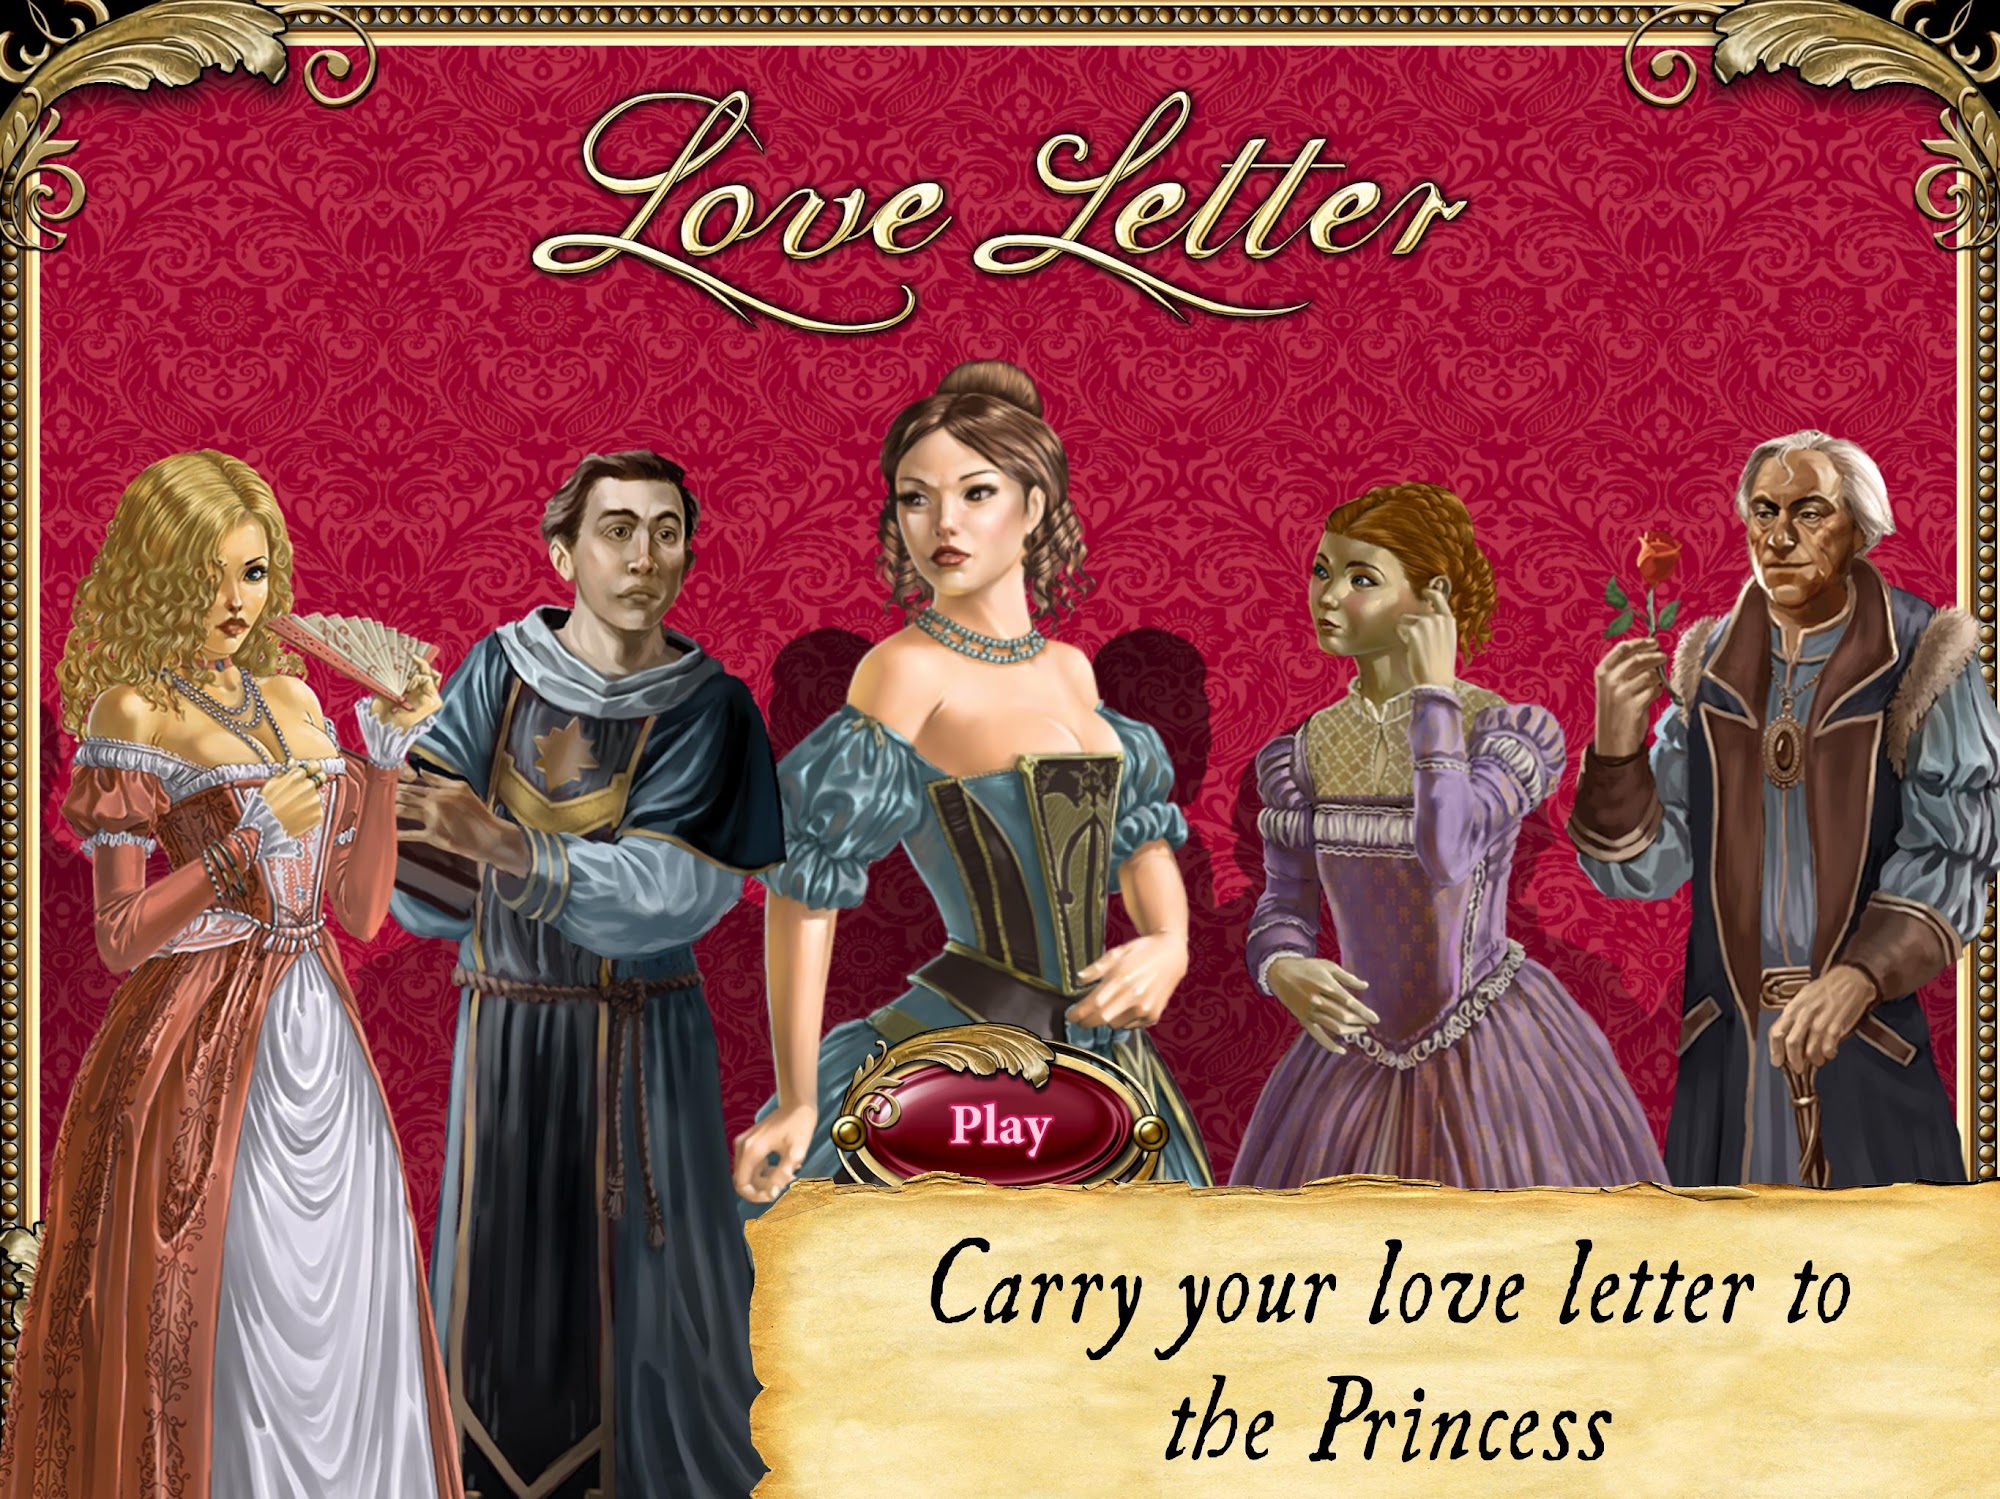 Download Love Letter - Strategy Card Game für Android kostenlos.